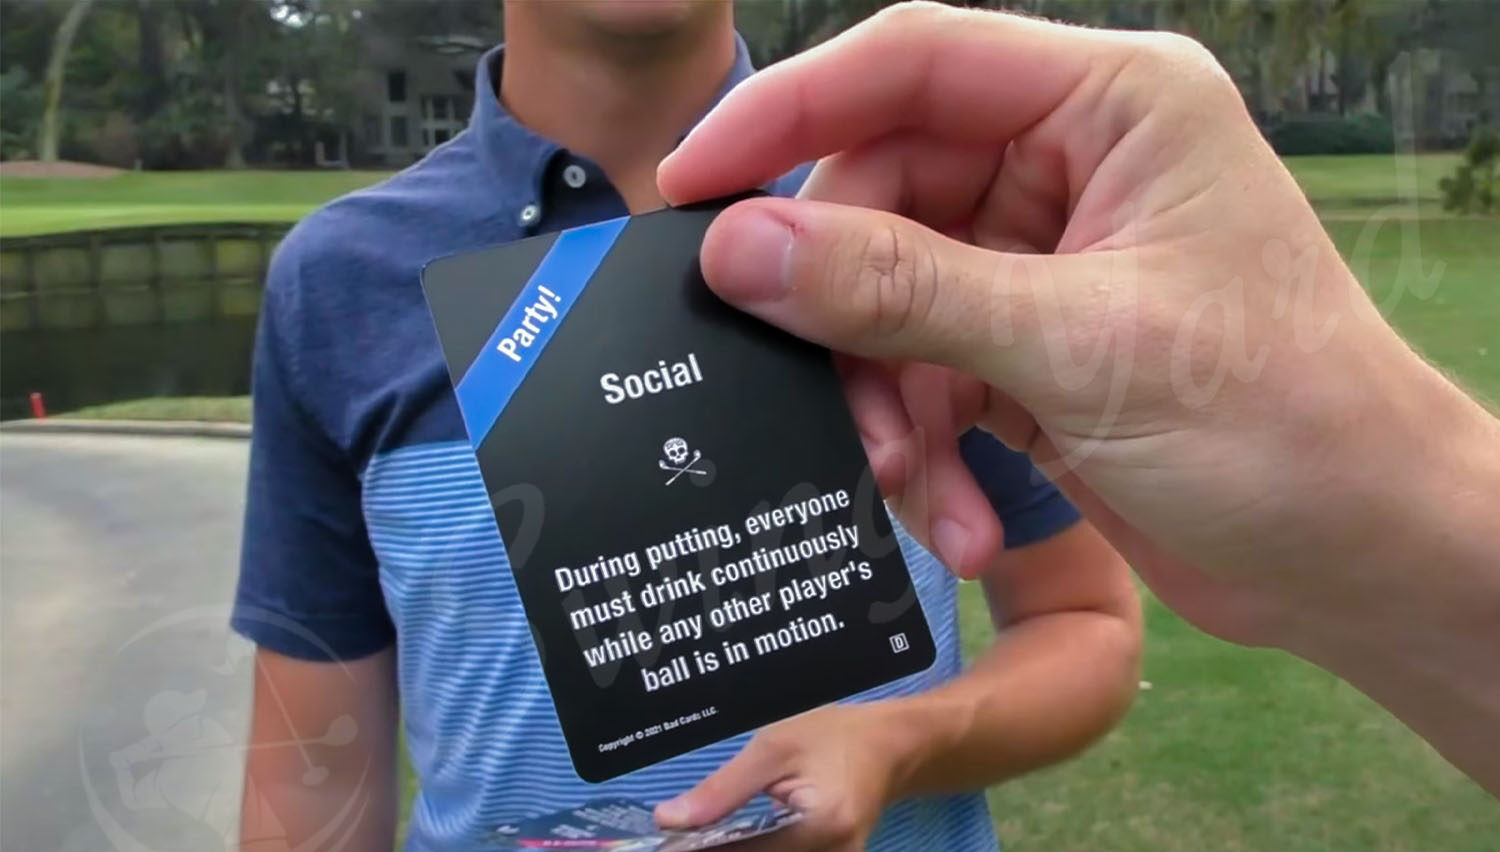 I got a blue Bad Cards fore good golfers in my friend's hand